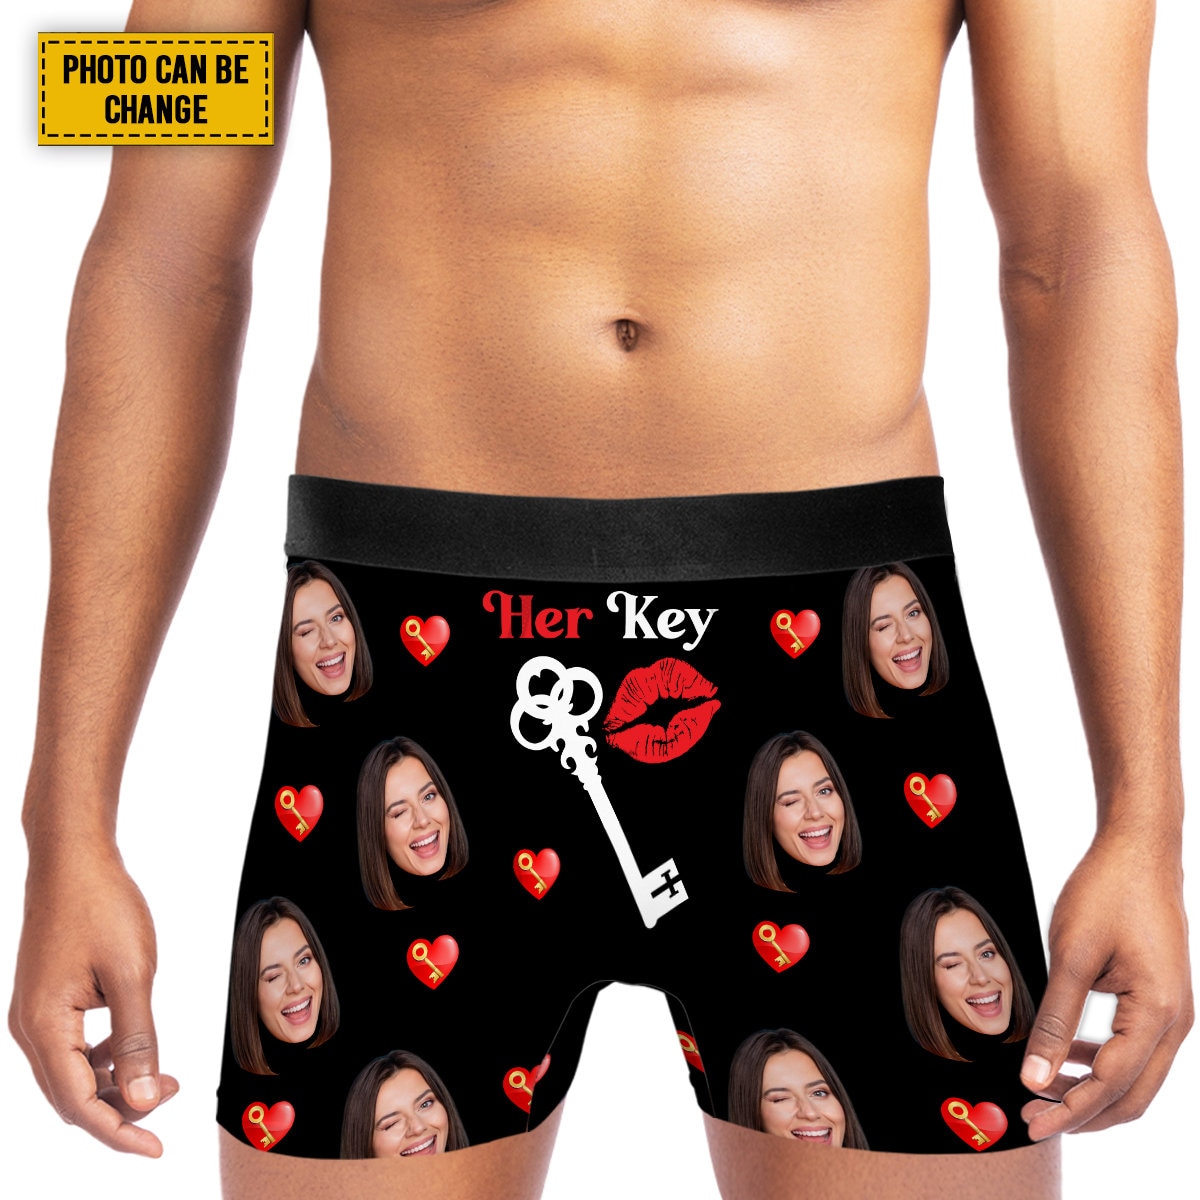 Personalized Photo Couple Matching Underwear for Fwb, His Lock Her